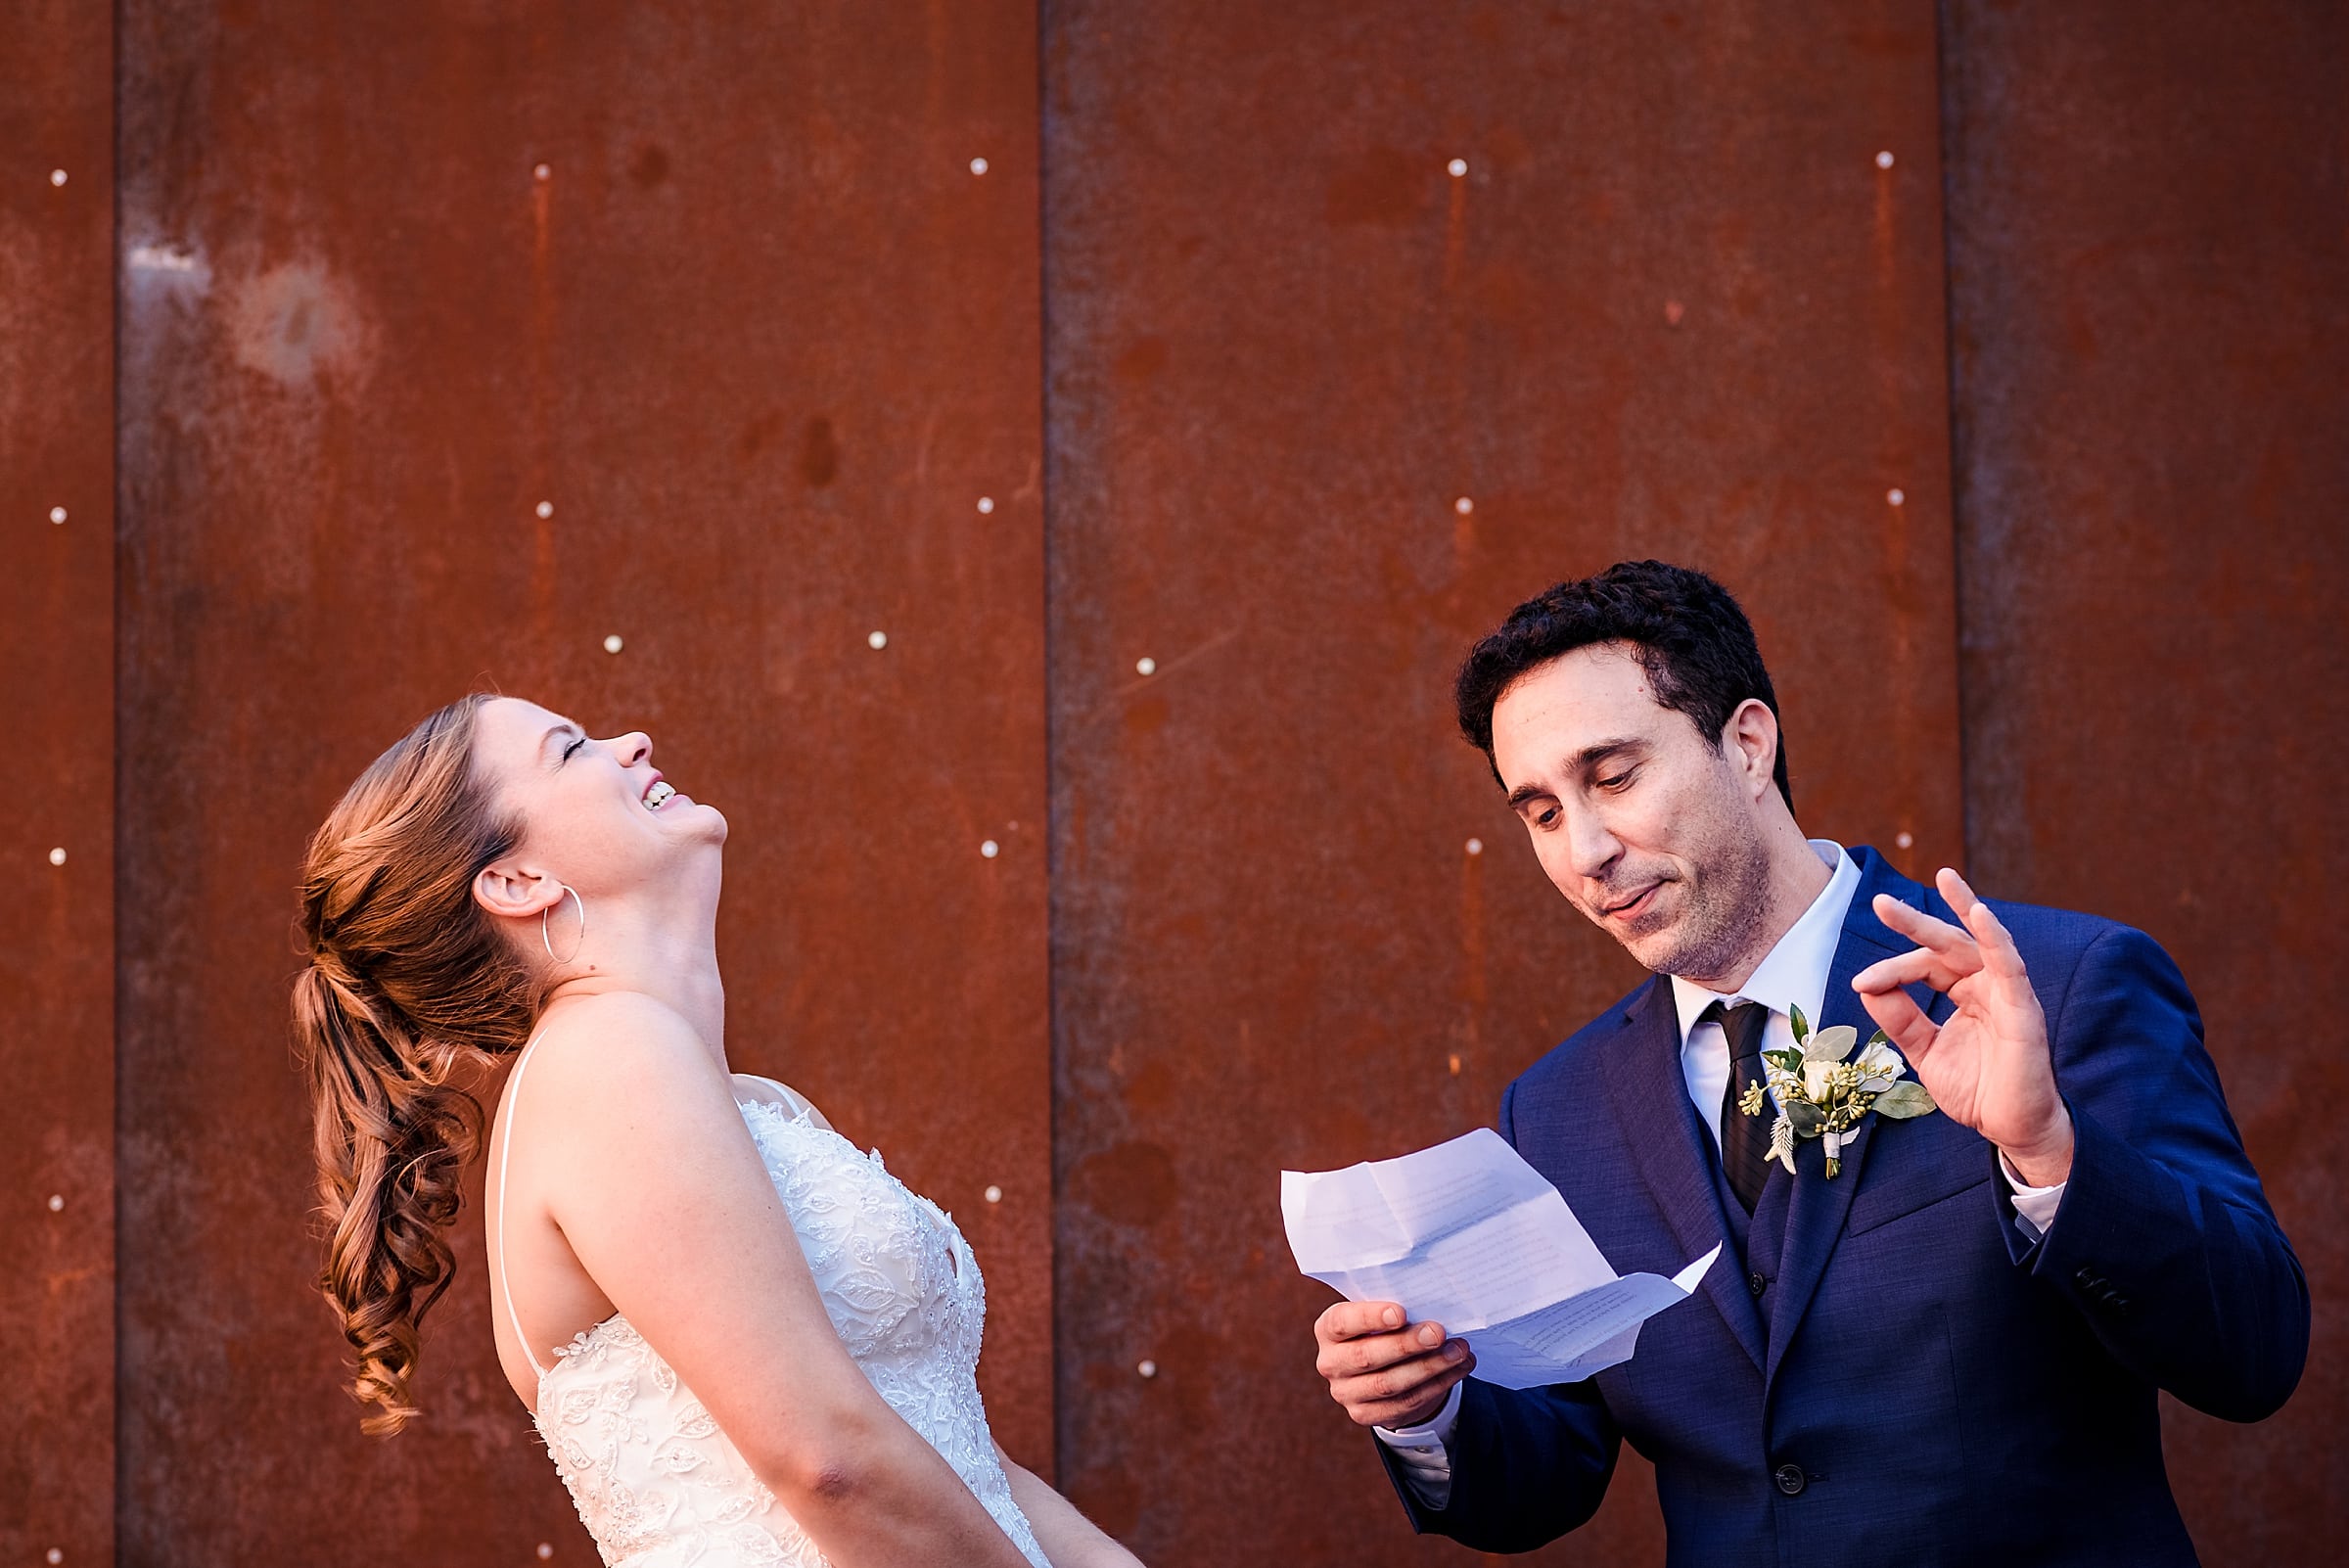 wedding vows that make your spouse laugh hysterically are the best